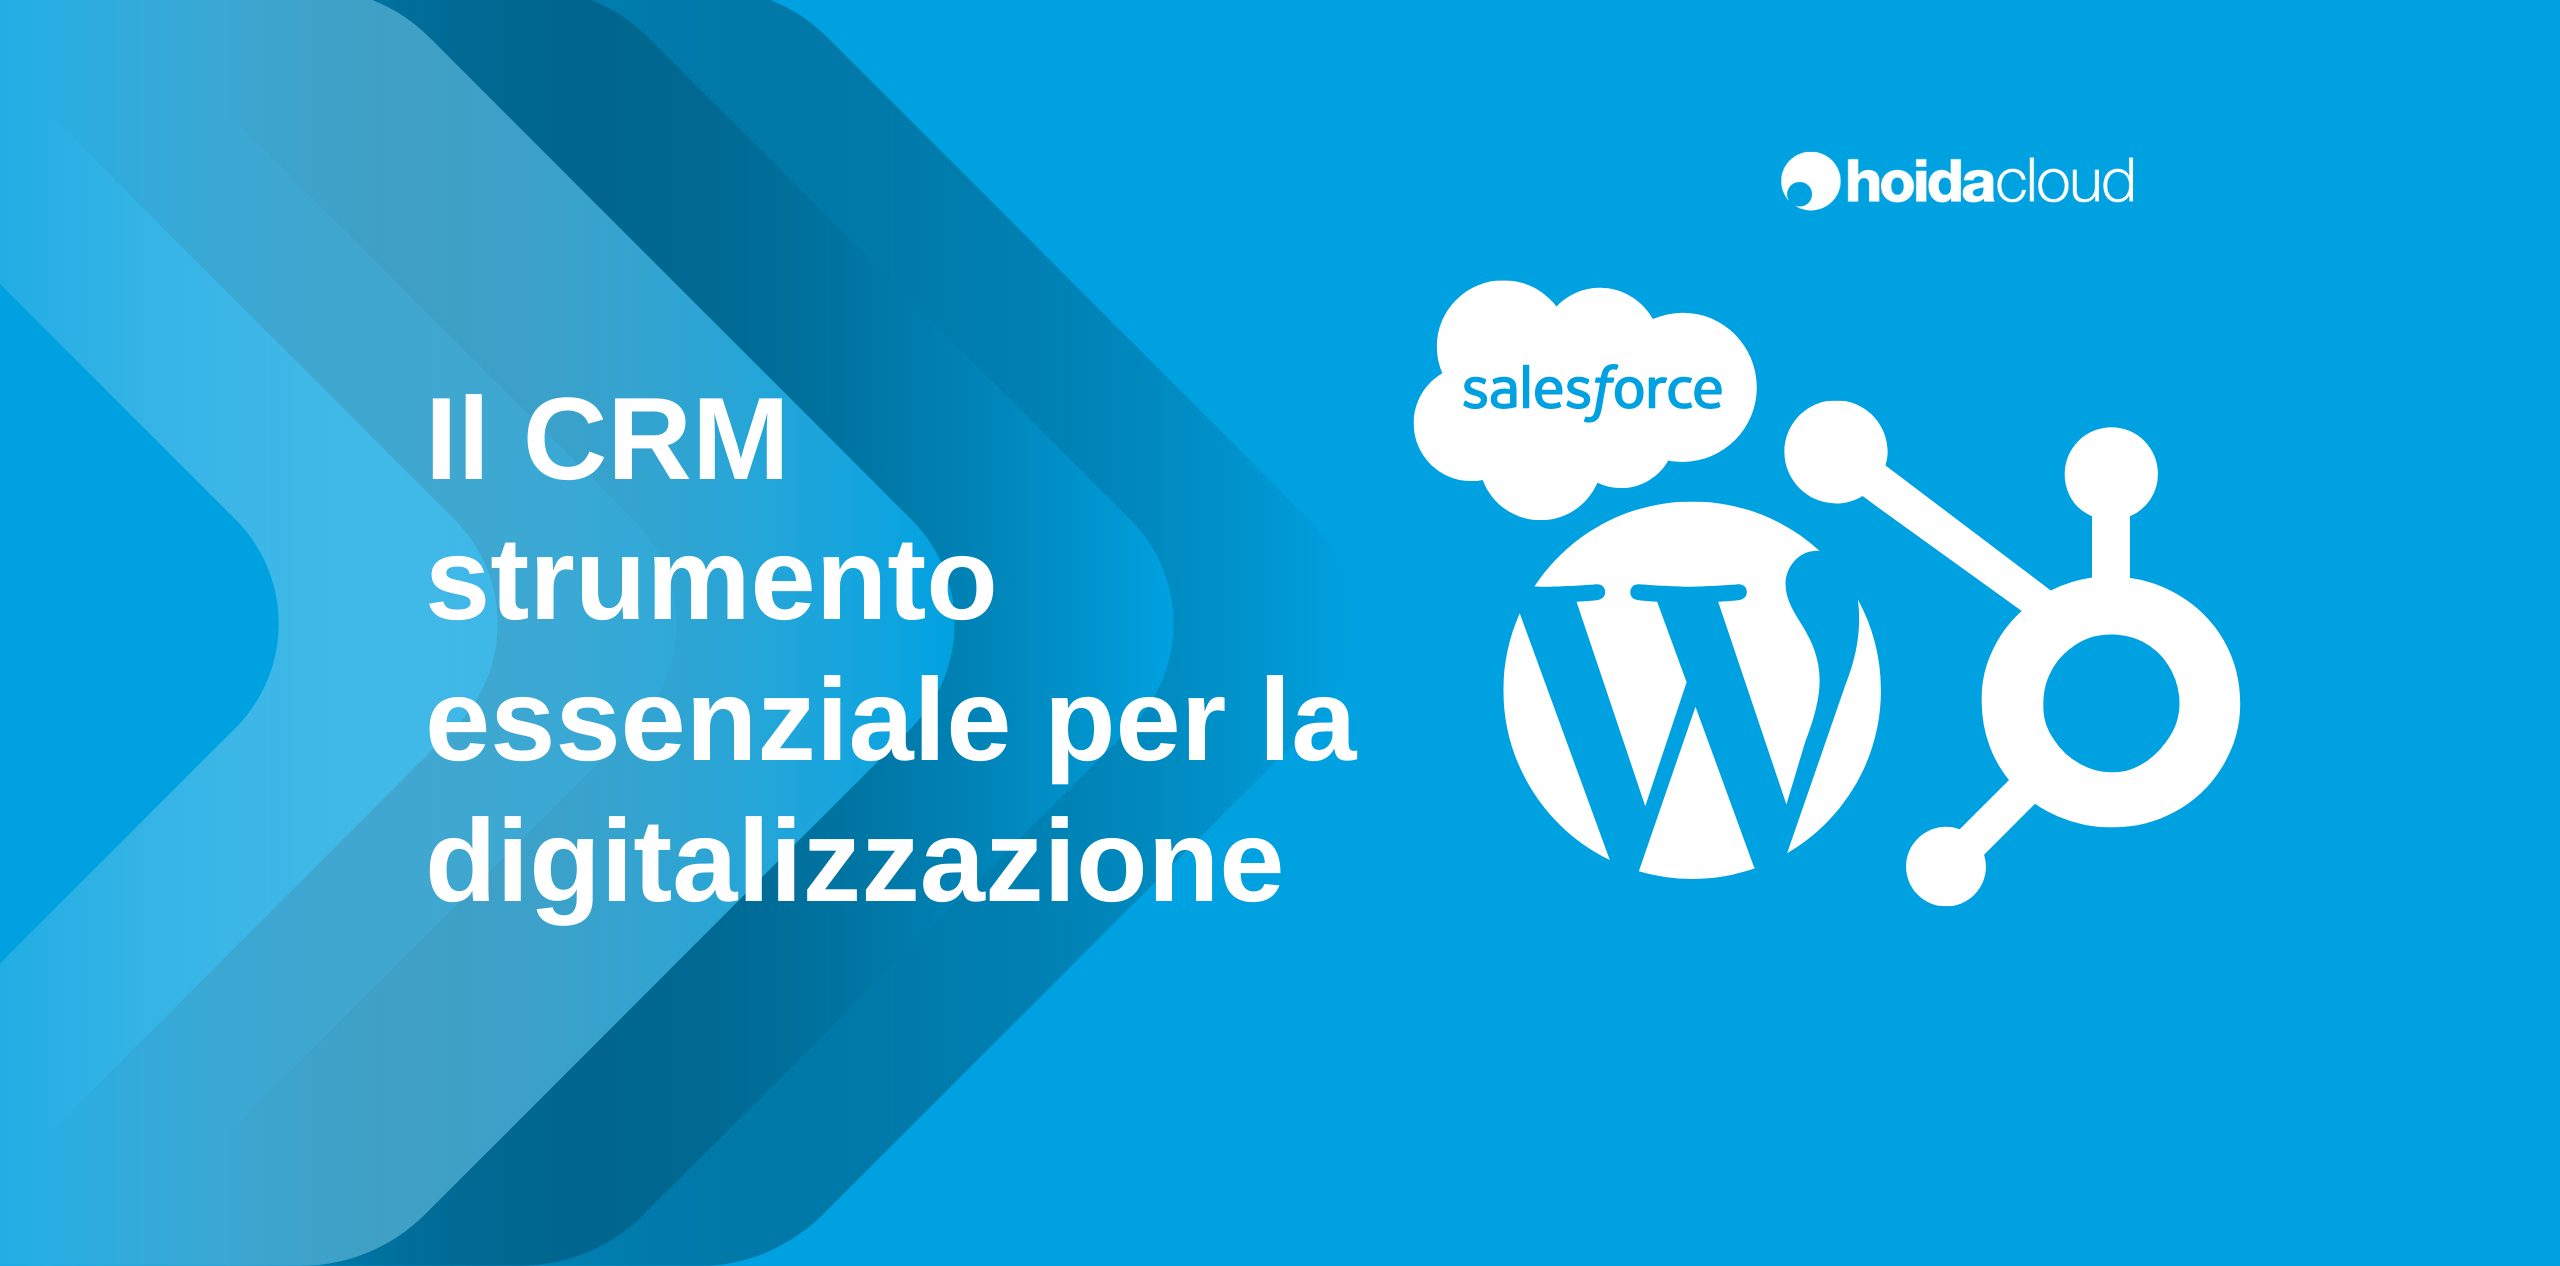 software crm